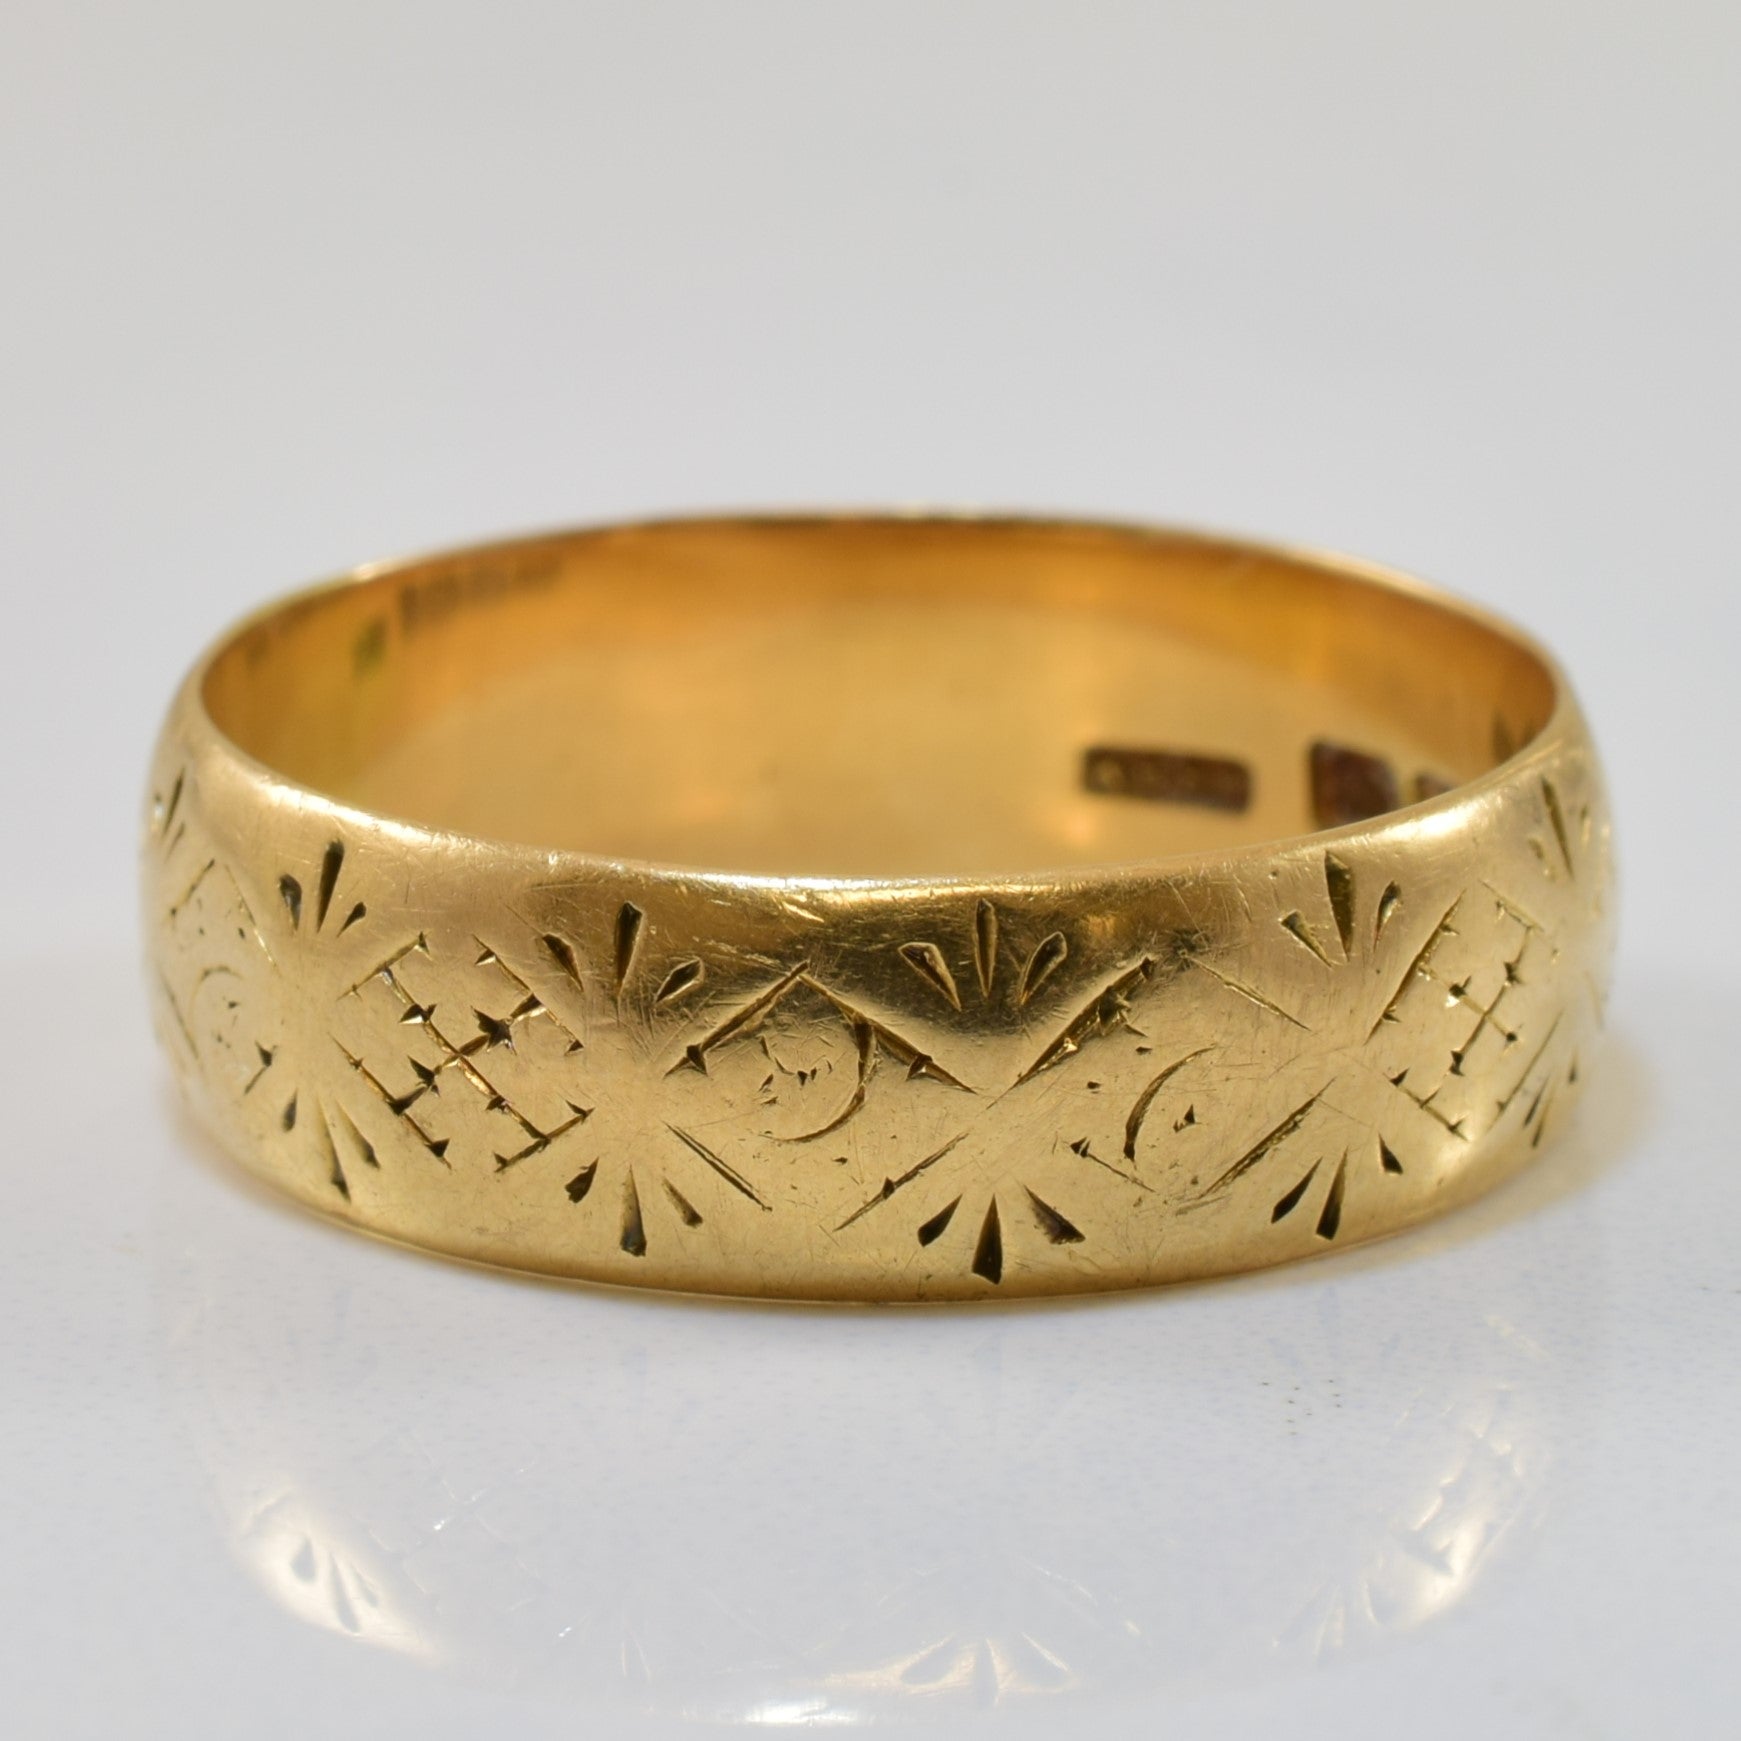 Early 1900s Patterned Band | SZ 11 |